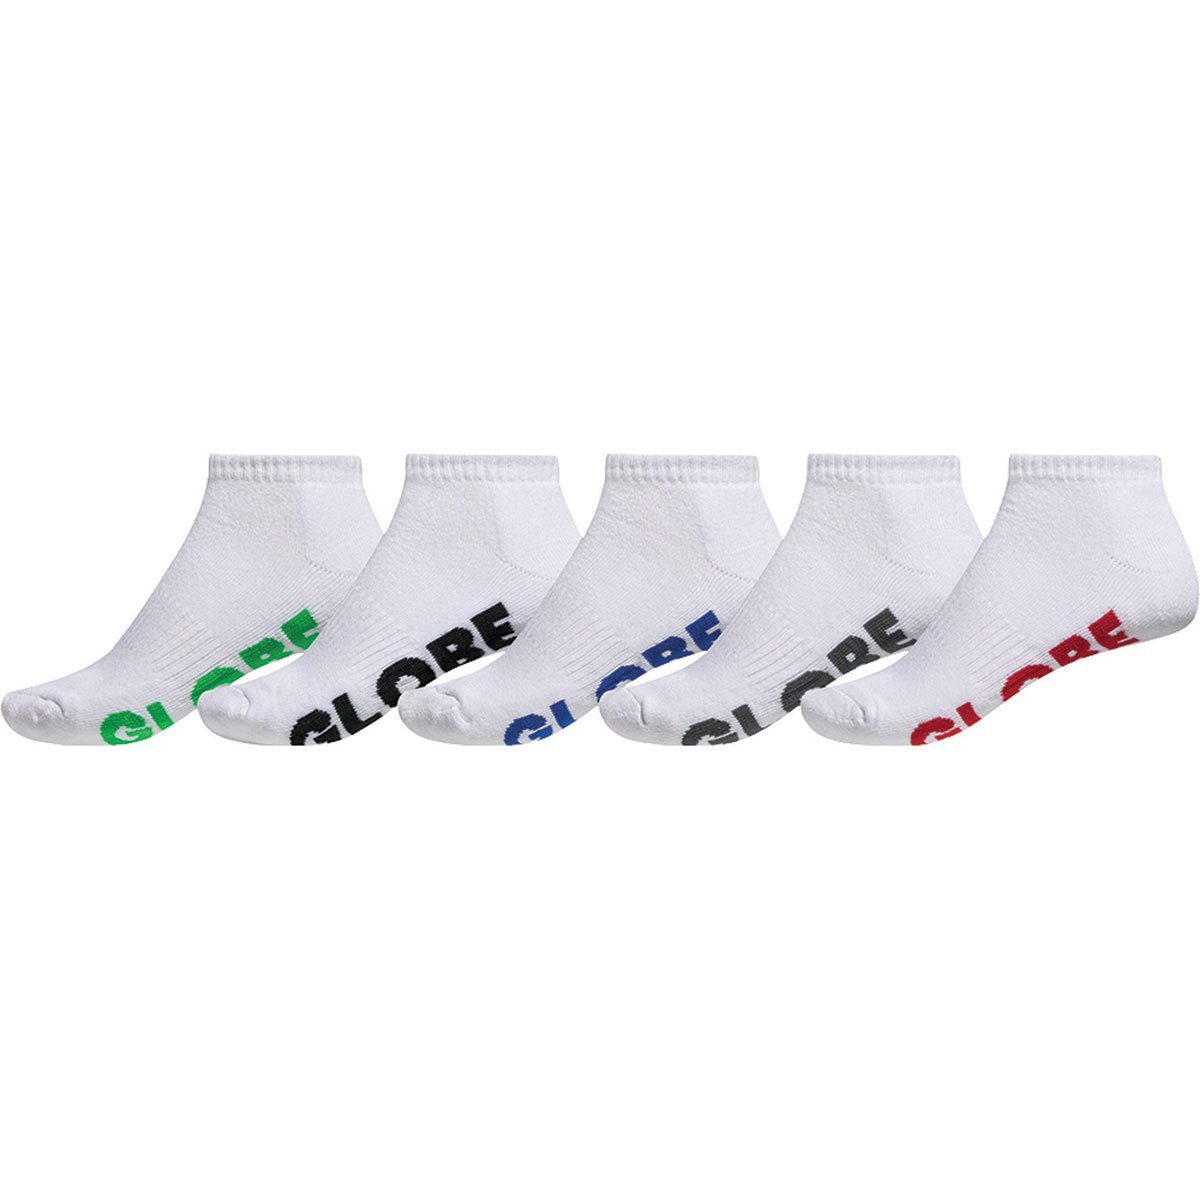 GLOBE STEALTH ANKLE SOCK 5 PK - Boutique Homies